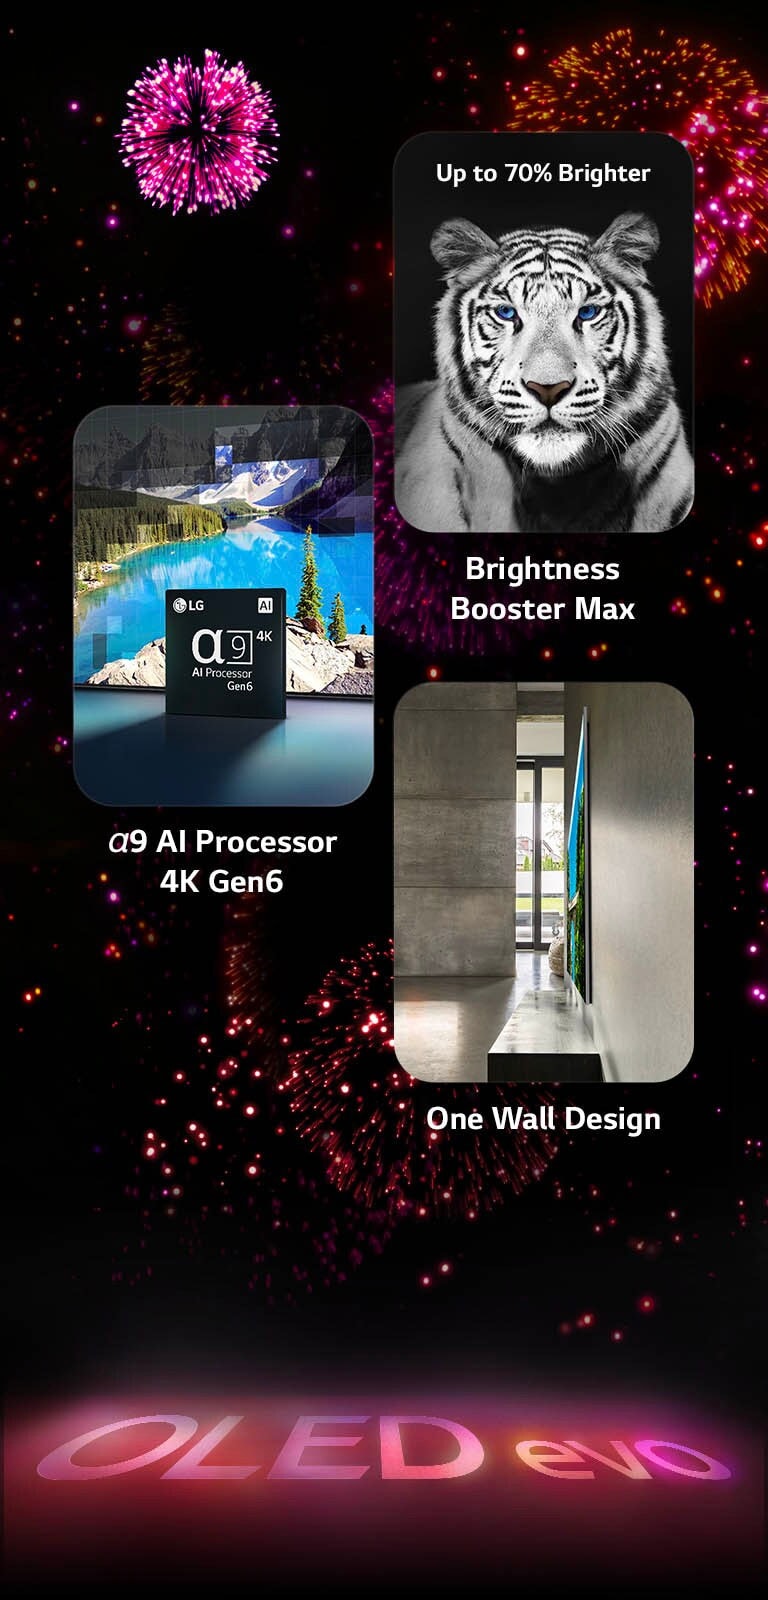 "An image presenting the key features of the LG OLED evo G3 against a black background with a pink and purple firework display. The pink reflection from the firework display on the ground shows the words ""OLED evo."" Within the picture, an image depicting the α9 AI Processor 4K Gen6 shows the chip standing before a picture of a lake scene being remastered with the processing technology. An image presenting Brightness Booster Max shows a tiger with deep contrast and bright whites. An image presenting the 5-Year Panel Warranty shows the Premium OLED G3 warranty logo with the display in the backdrop. An image presenting One Wall Design shows LG OLED evo G3 flush against the wall in a grey industrial living space. 	  "